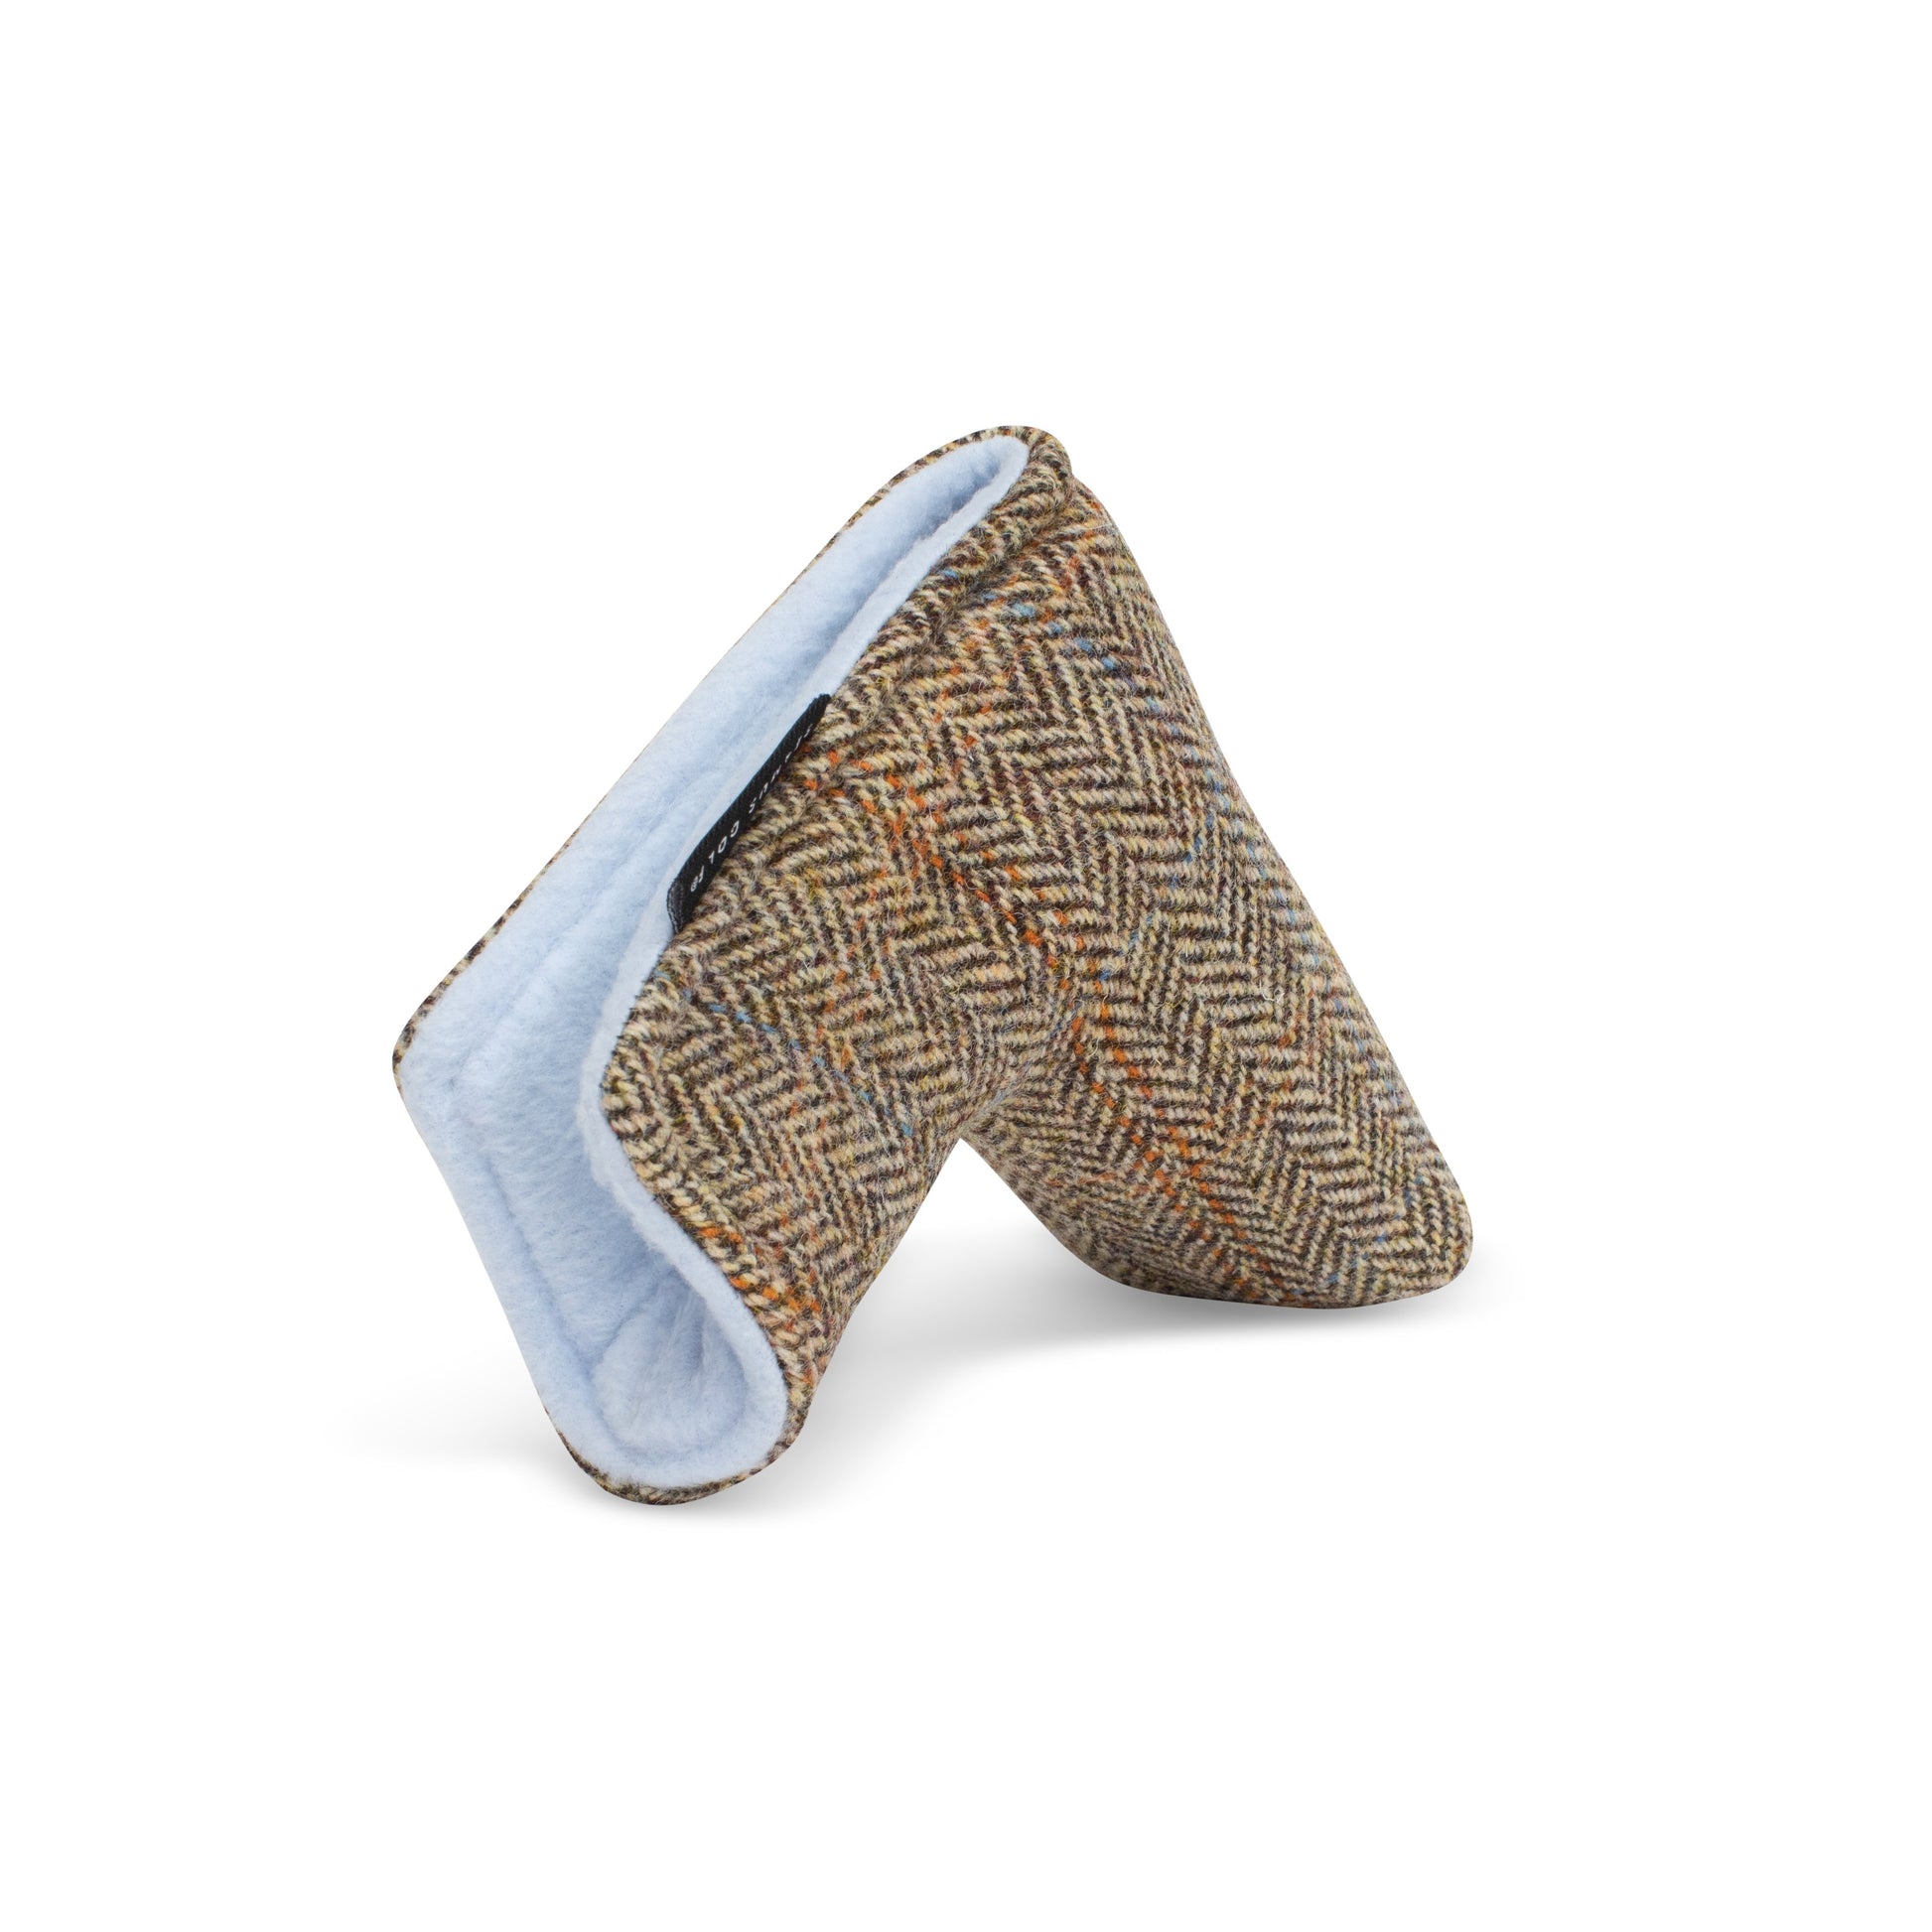 Seamus Golf - Blade Putter Head Cover made from Glen Plaid Harris Tweed Wool with Magnet Closure back view